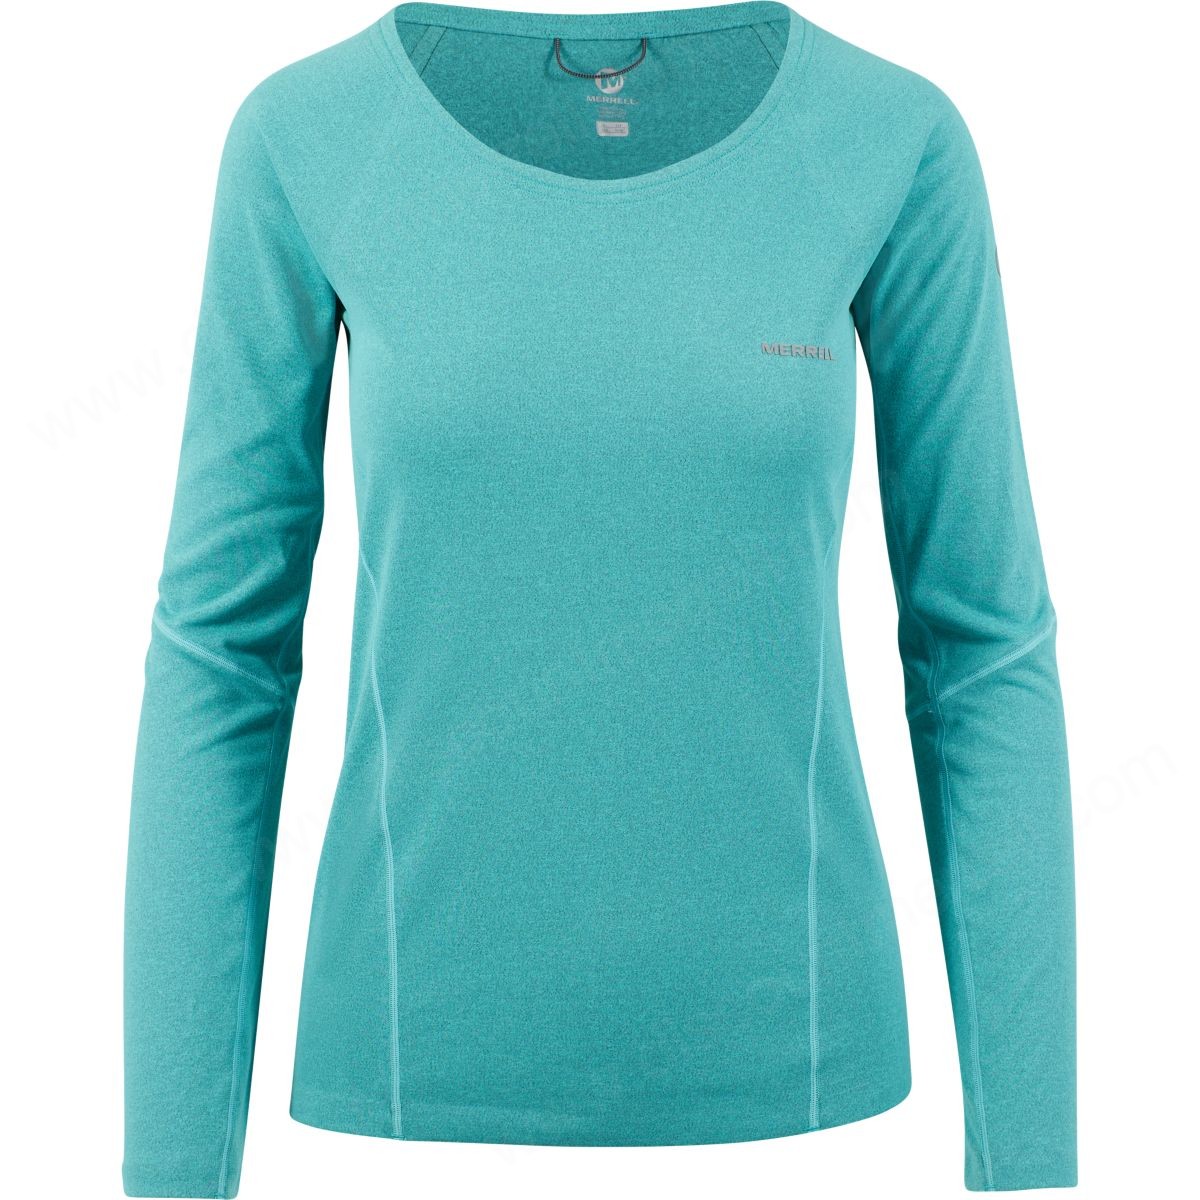 Merrell Women's Long Sleeve Tech T-Shirt With Power Dry® Fabric Baltic Solid - -0